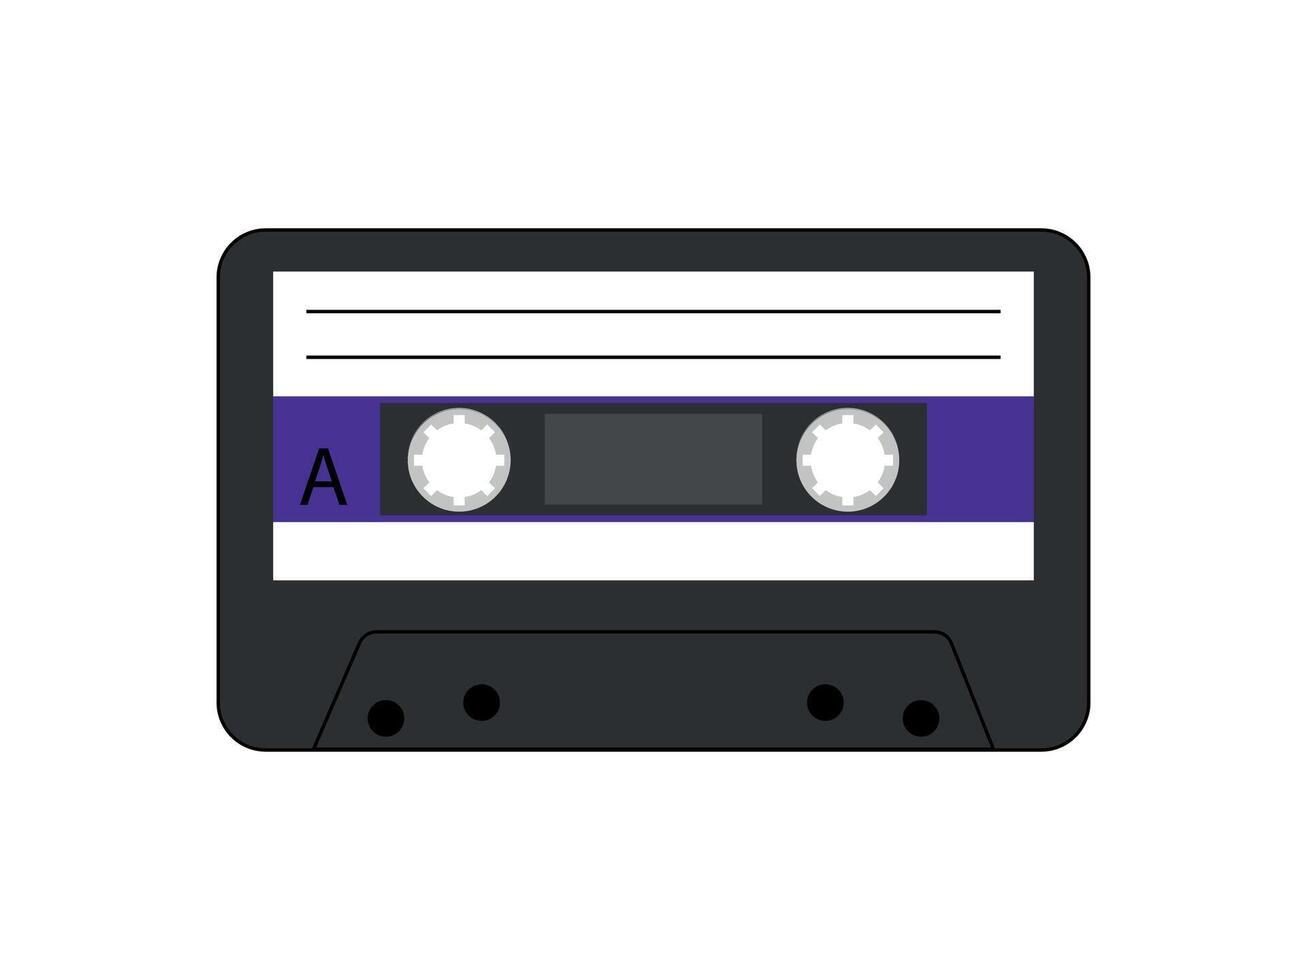 Retro music cassettes in the style of the 90s and 2000s. Musical hits of the 90s. Cassette tape symbol drawn. illustration vector